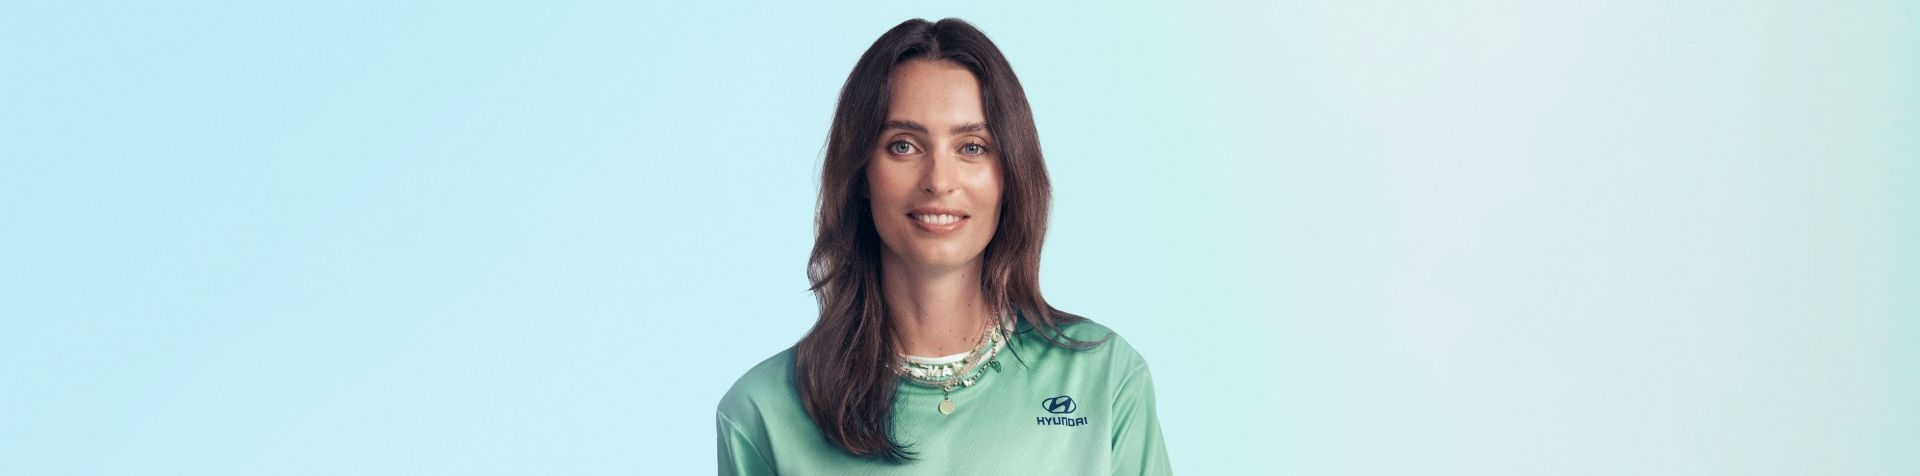 A close up of Ella Mills’ face. She is standing in front of a blue and green background and is wearing her green Team Century jersey and a couple of necklaces. She has long brown hair and blue eyes.